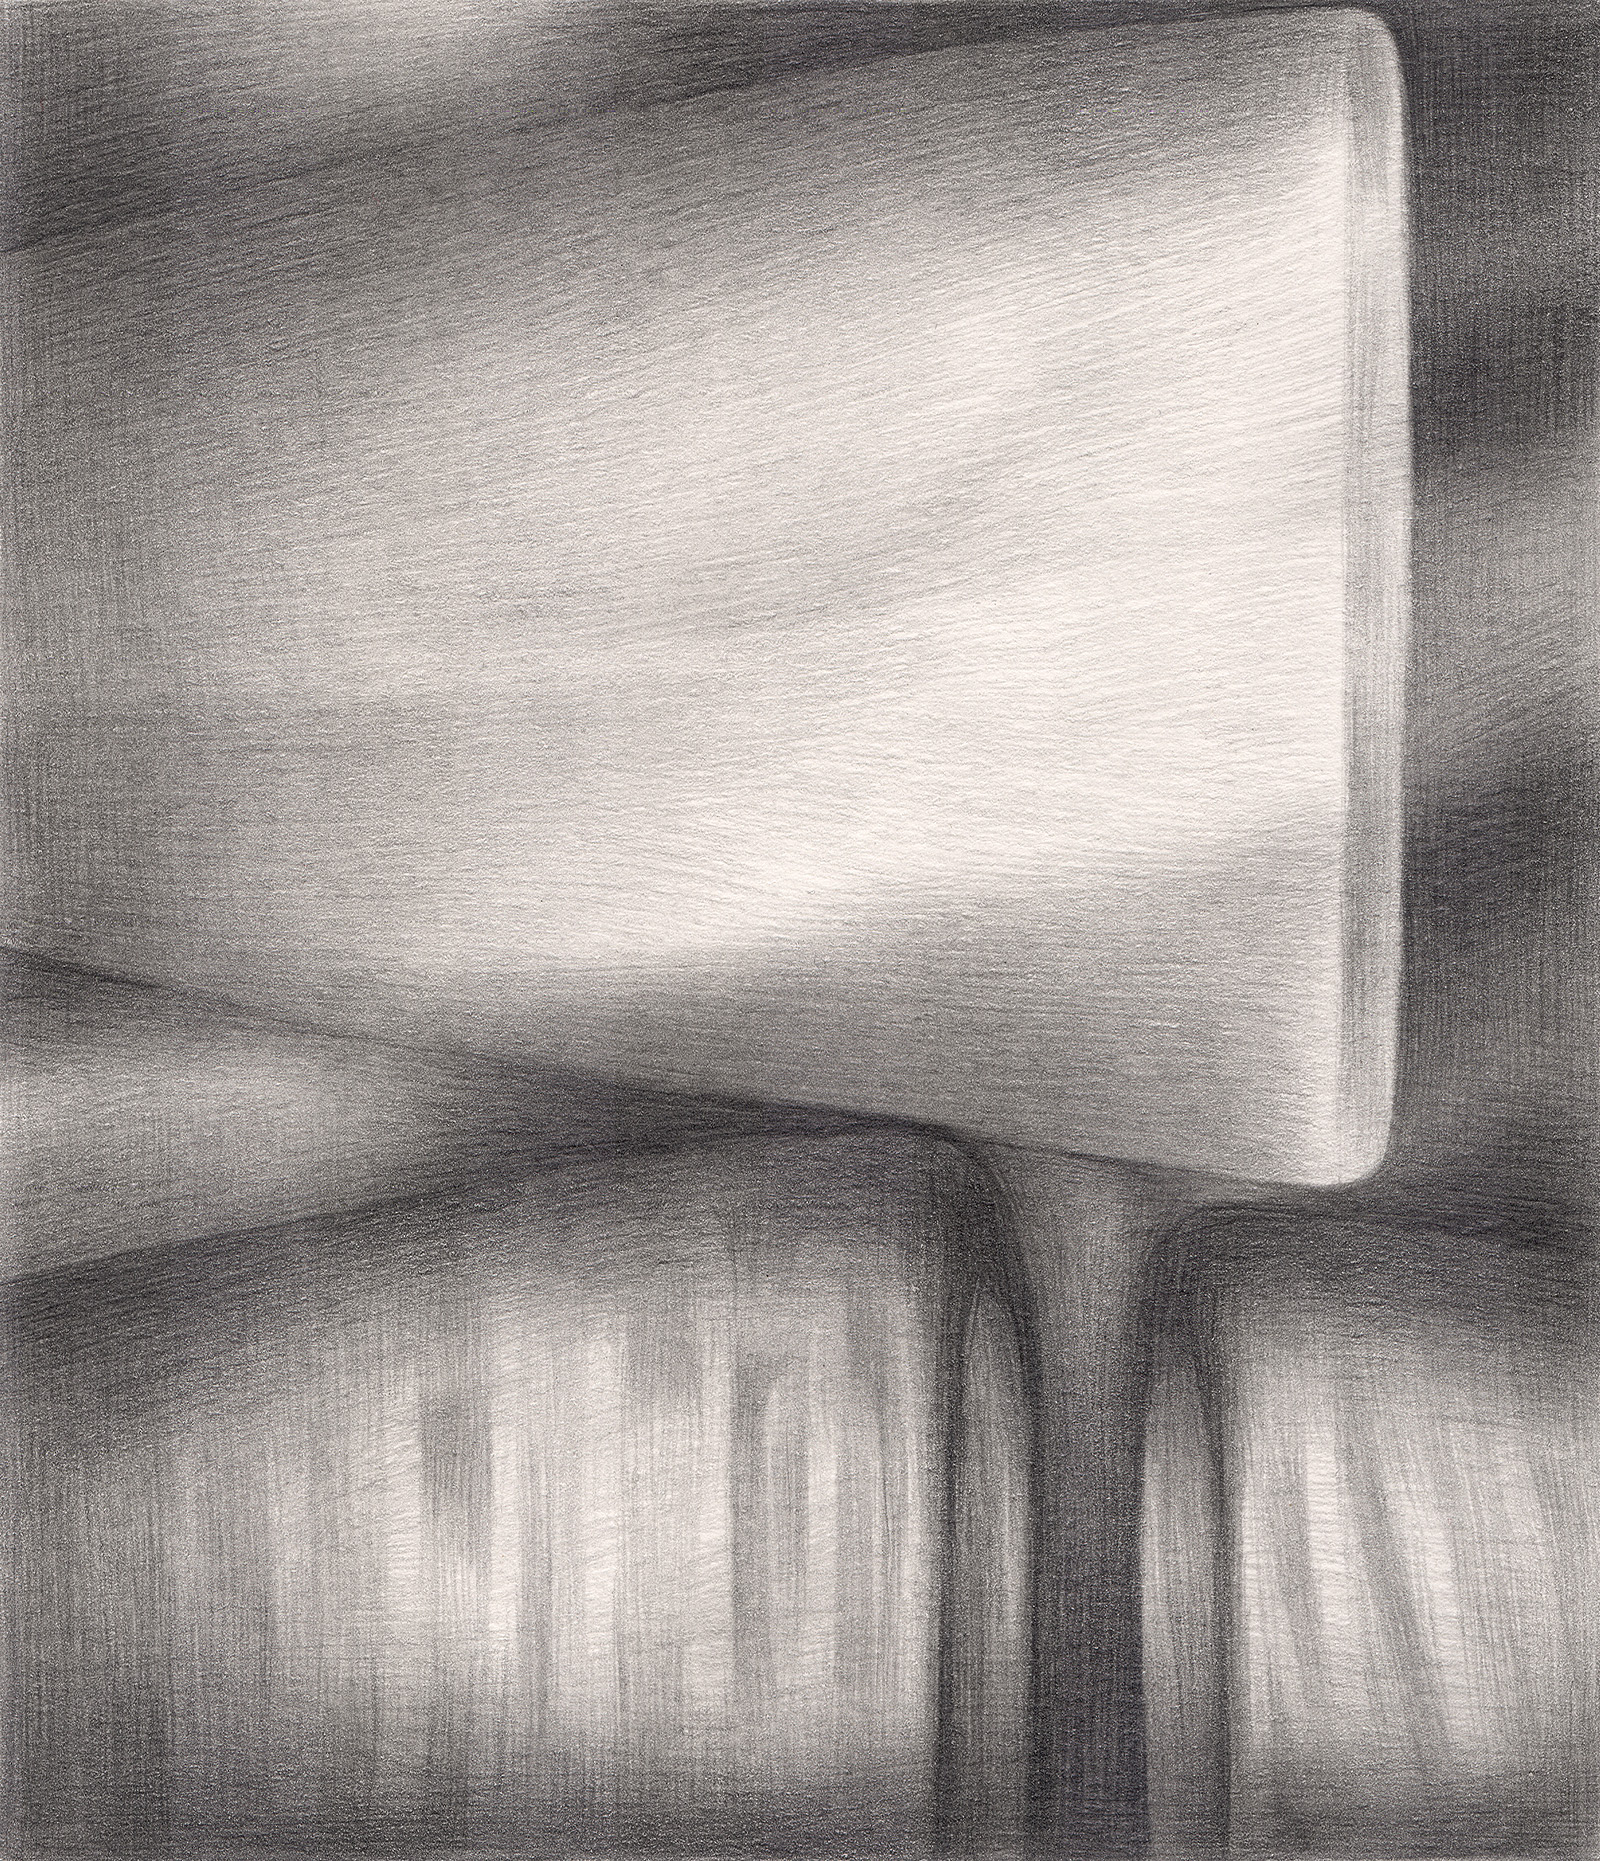   The Attention of Strangers , 2005. Graphite on paper. 6" x 7". 